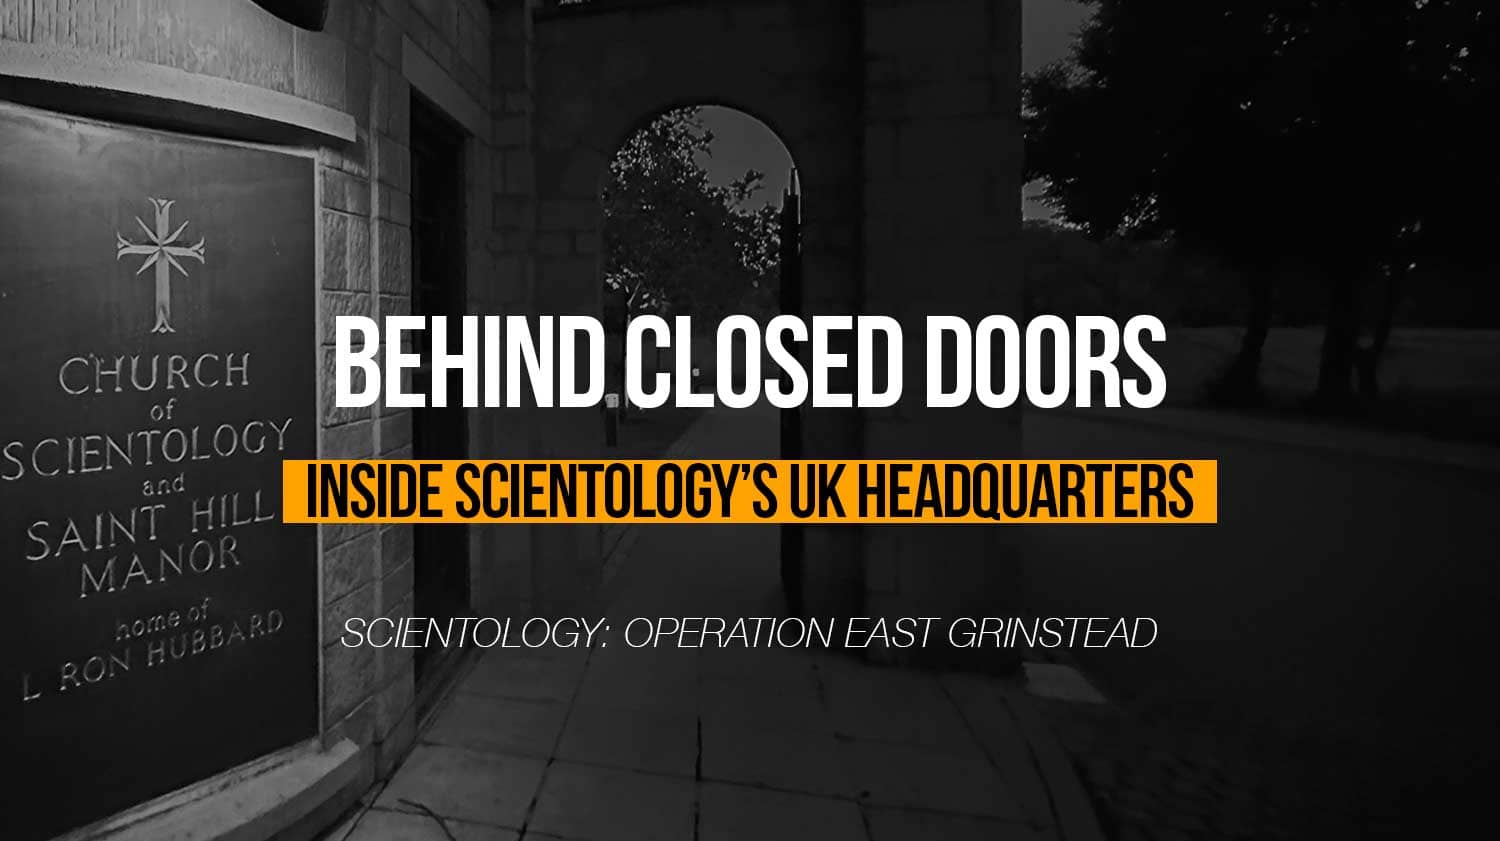 Scientology in the UK documentary 'behind closed doors'